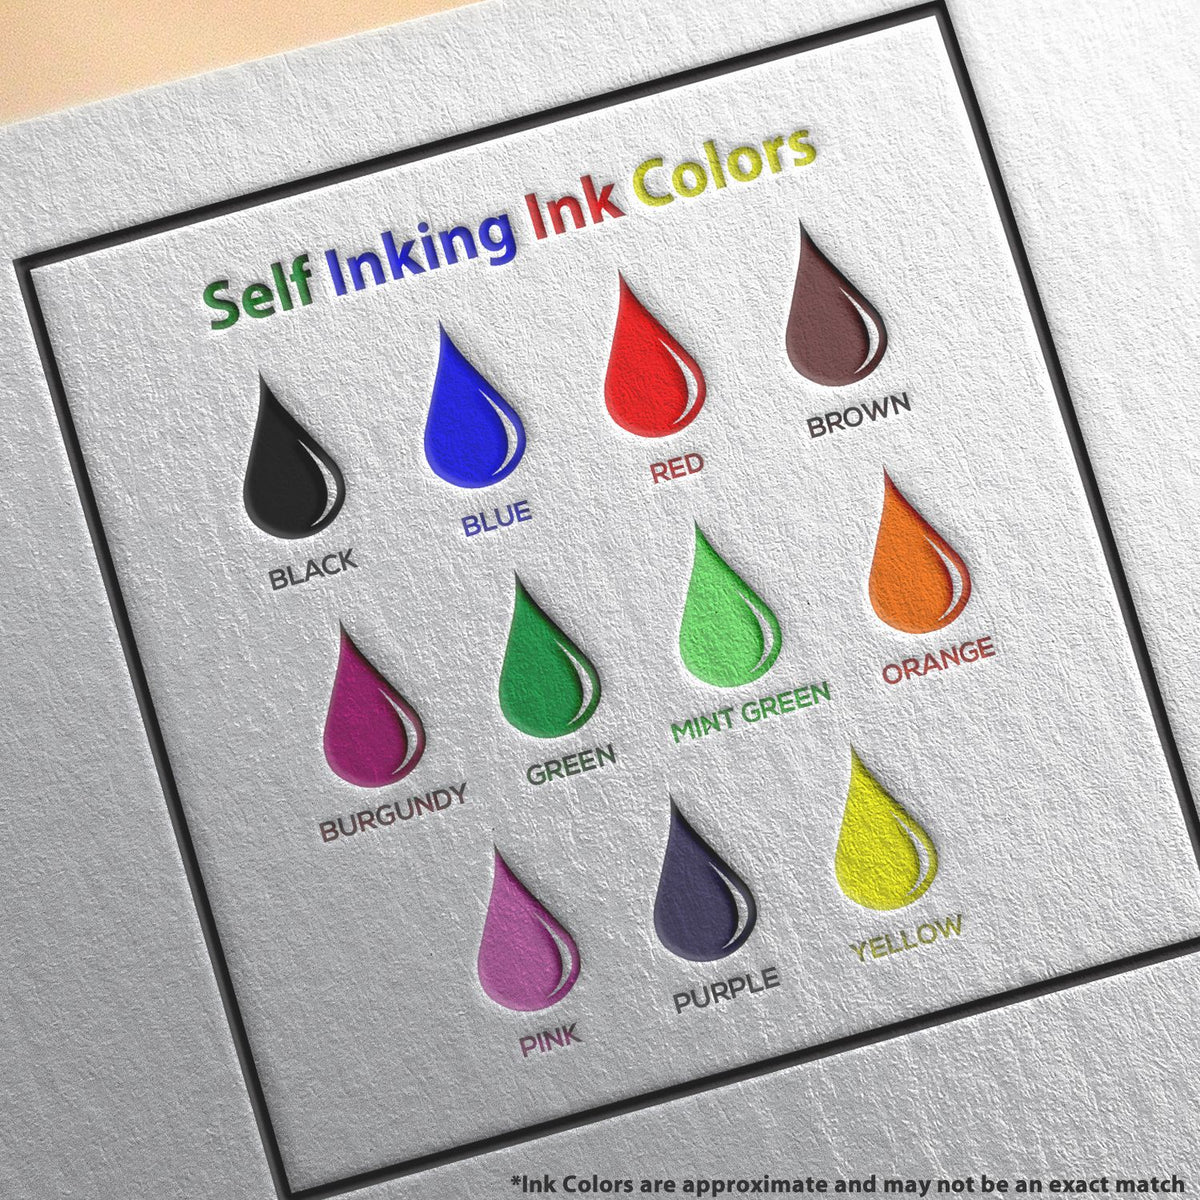 A picture showing the different ink colors or hues available for the Self-Inking South Dakota Landscape Architect Stamp product.